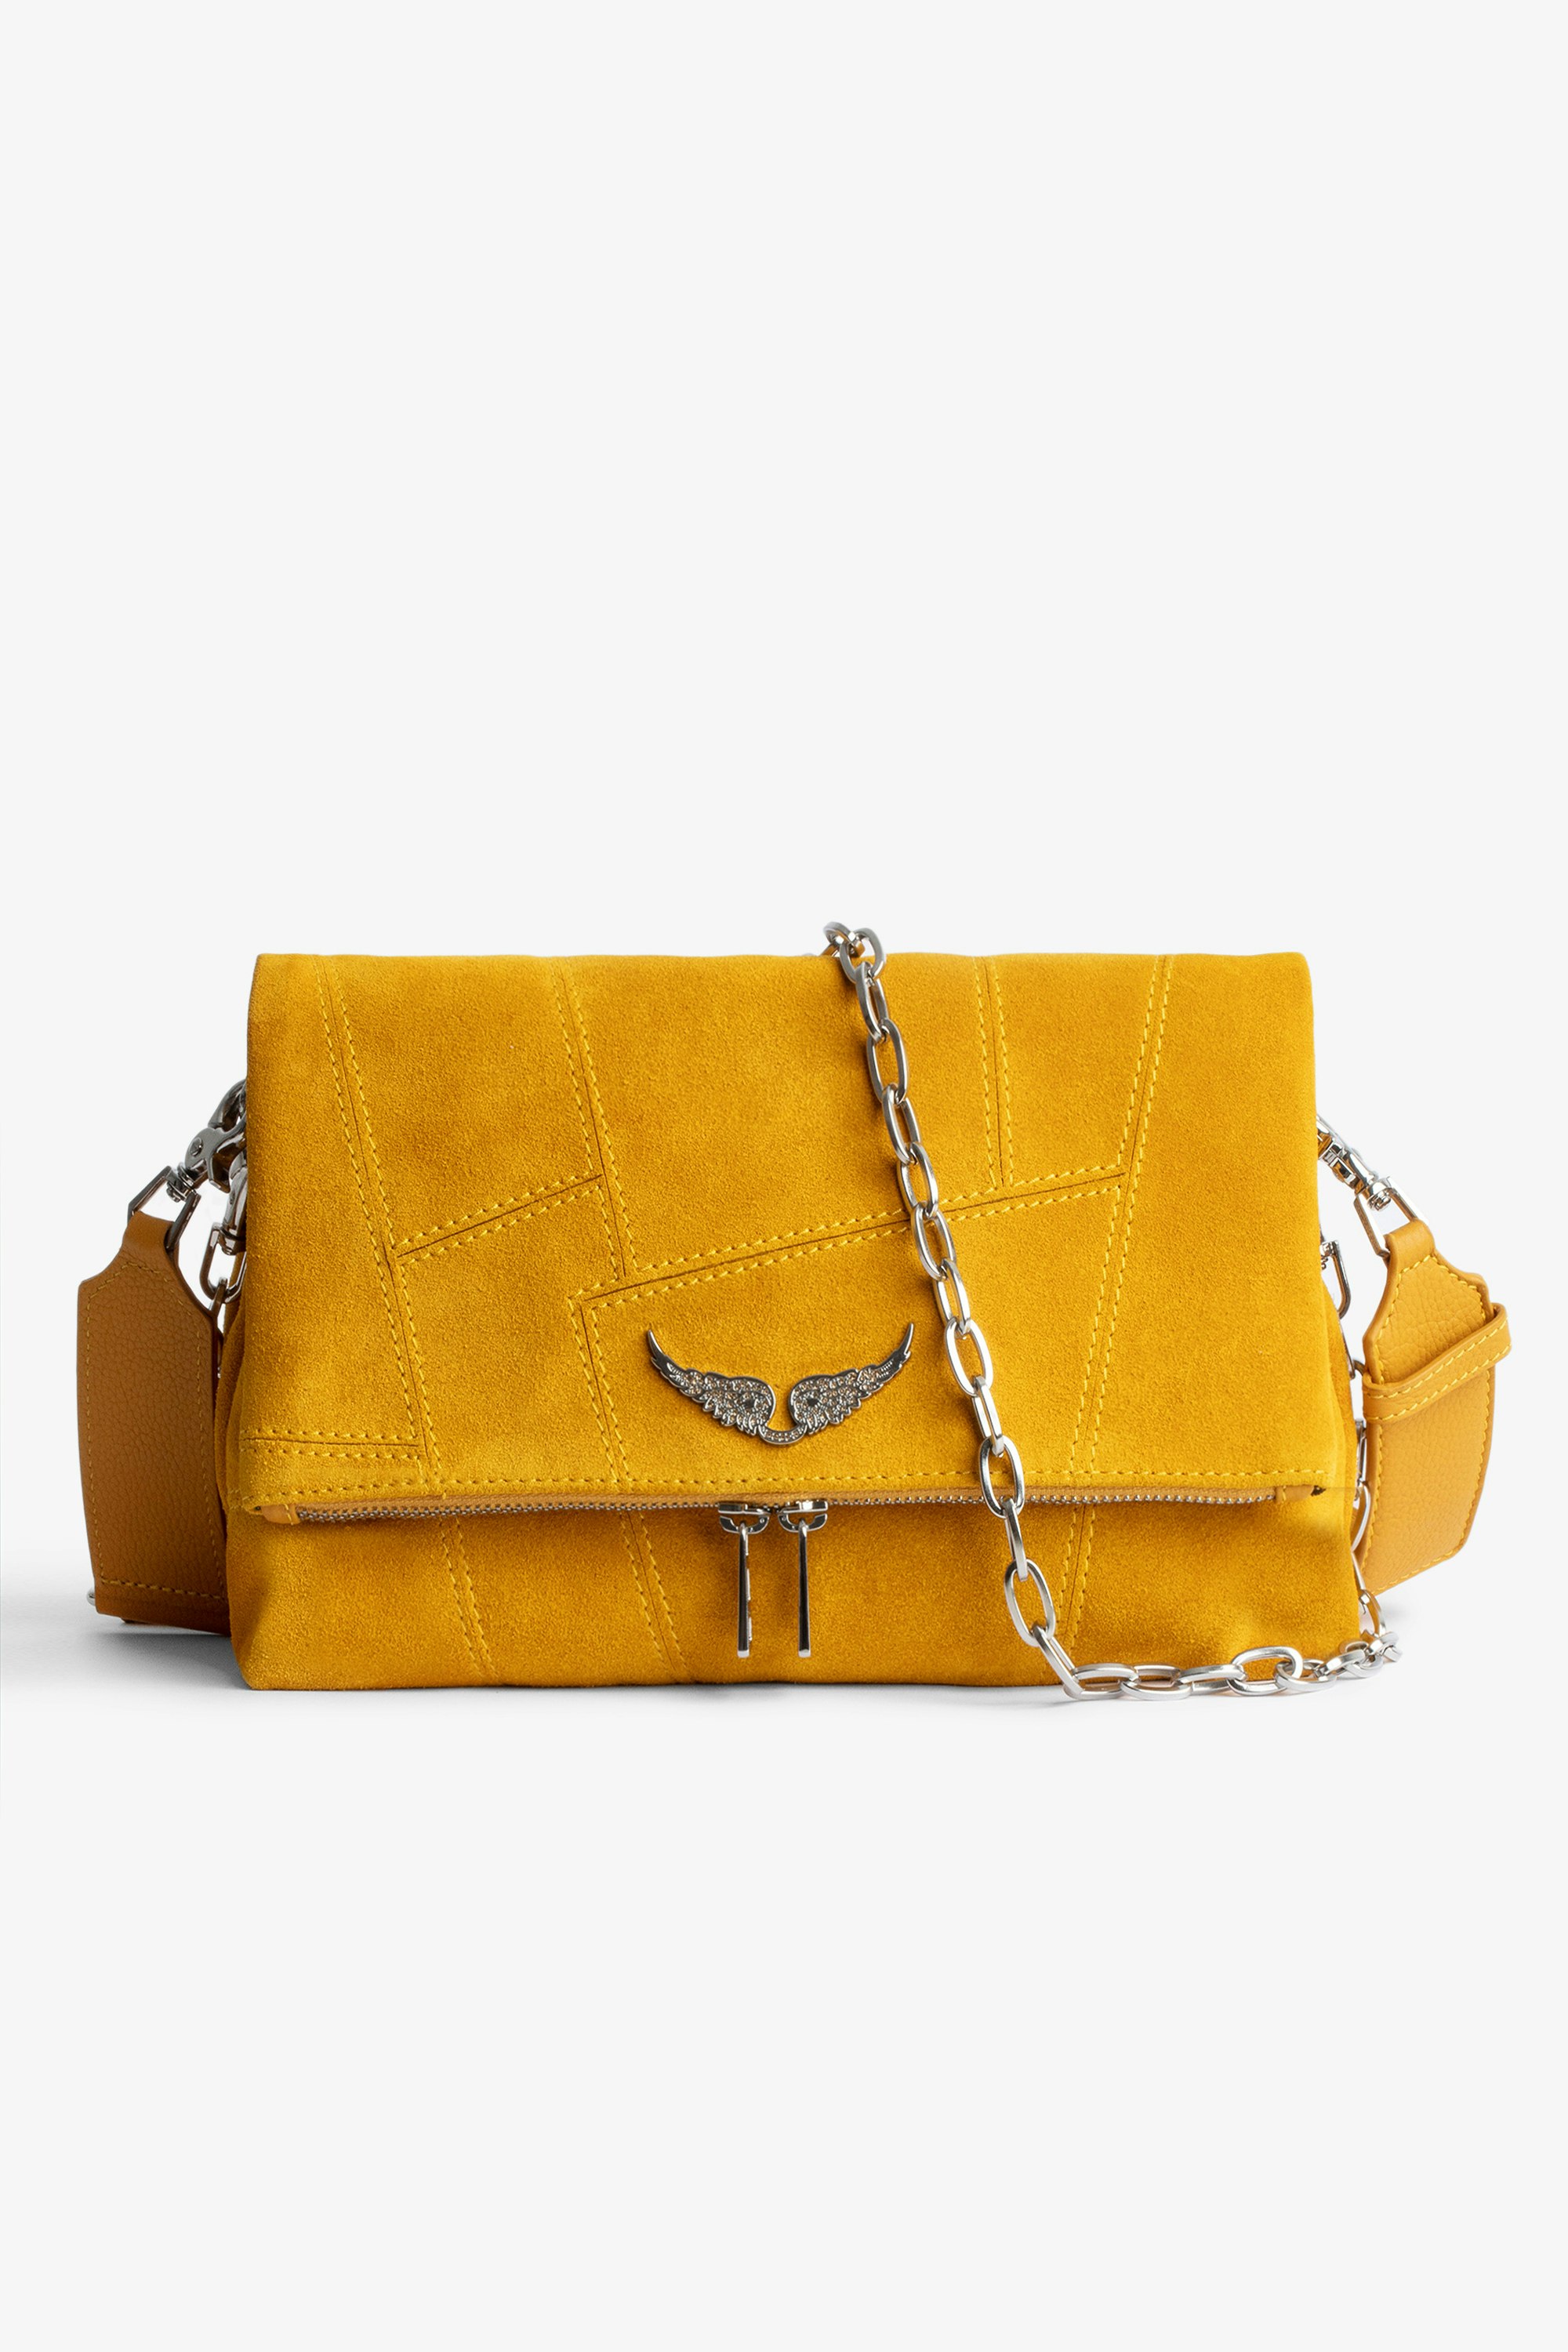 Rocky Suede Bag Bag in yellow patchwork suede with shoulder strap